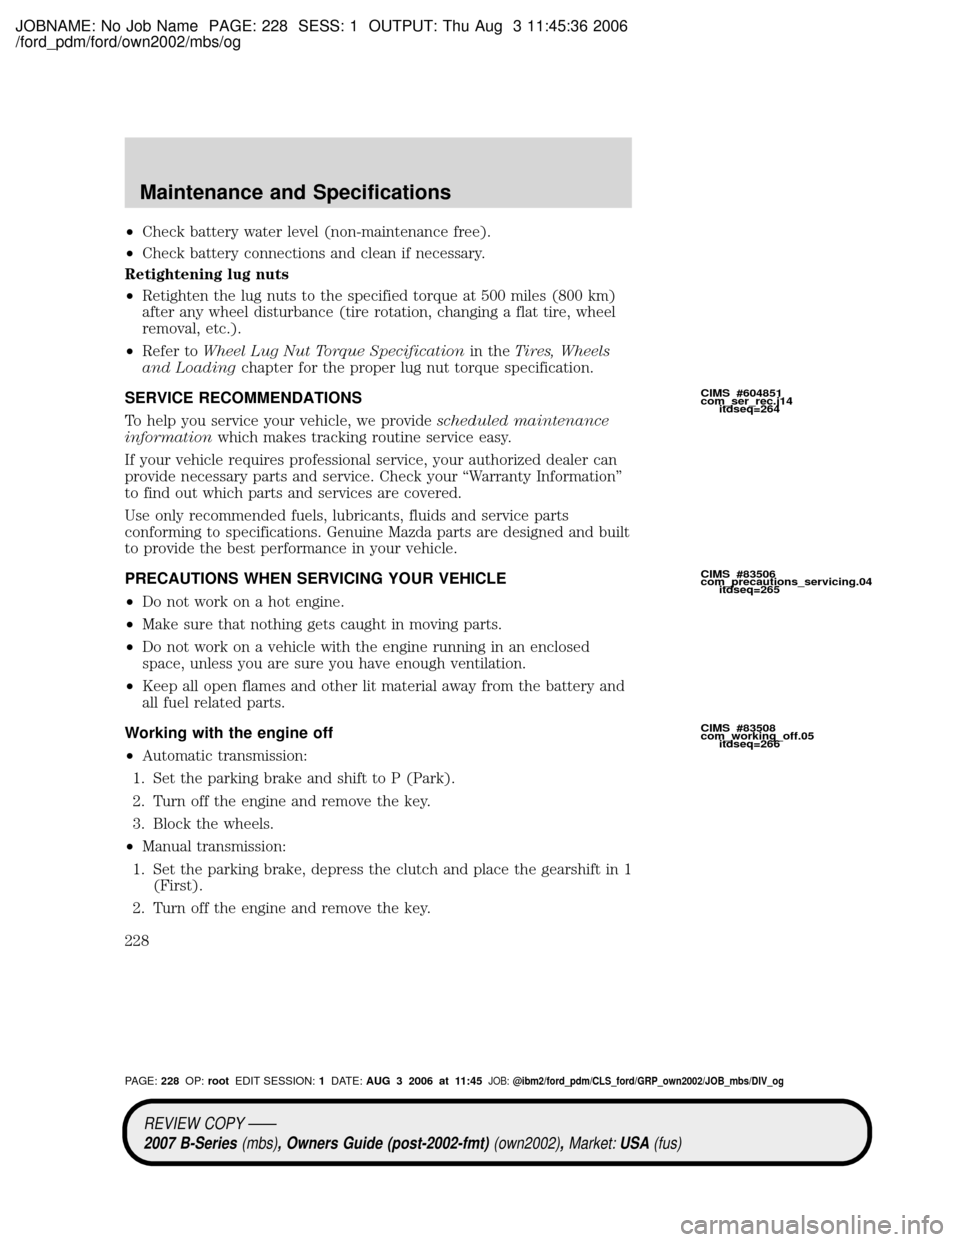 MAZDA MODEL B2300 TRUCK 2007   (in English) User Guide JOBNAME: No Job Name PAGE: 228 SESS: 1 OUTPUT: Thu Aug 3 11:45:36 2006
/ford_pdm/ford/own2002/mbs/og
²Check battery water level (non-maintenance free).
²Check battery connections and clean if necess